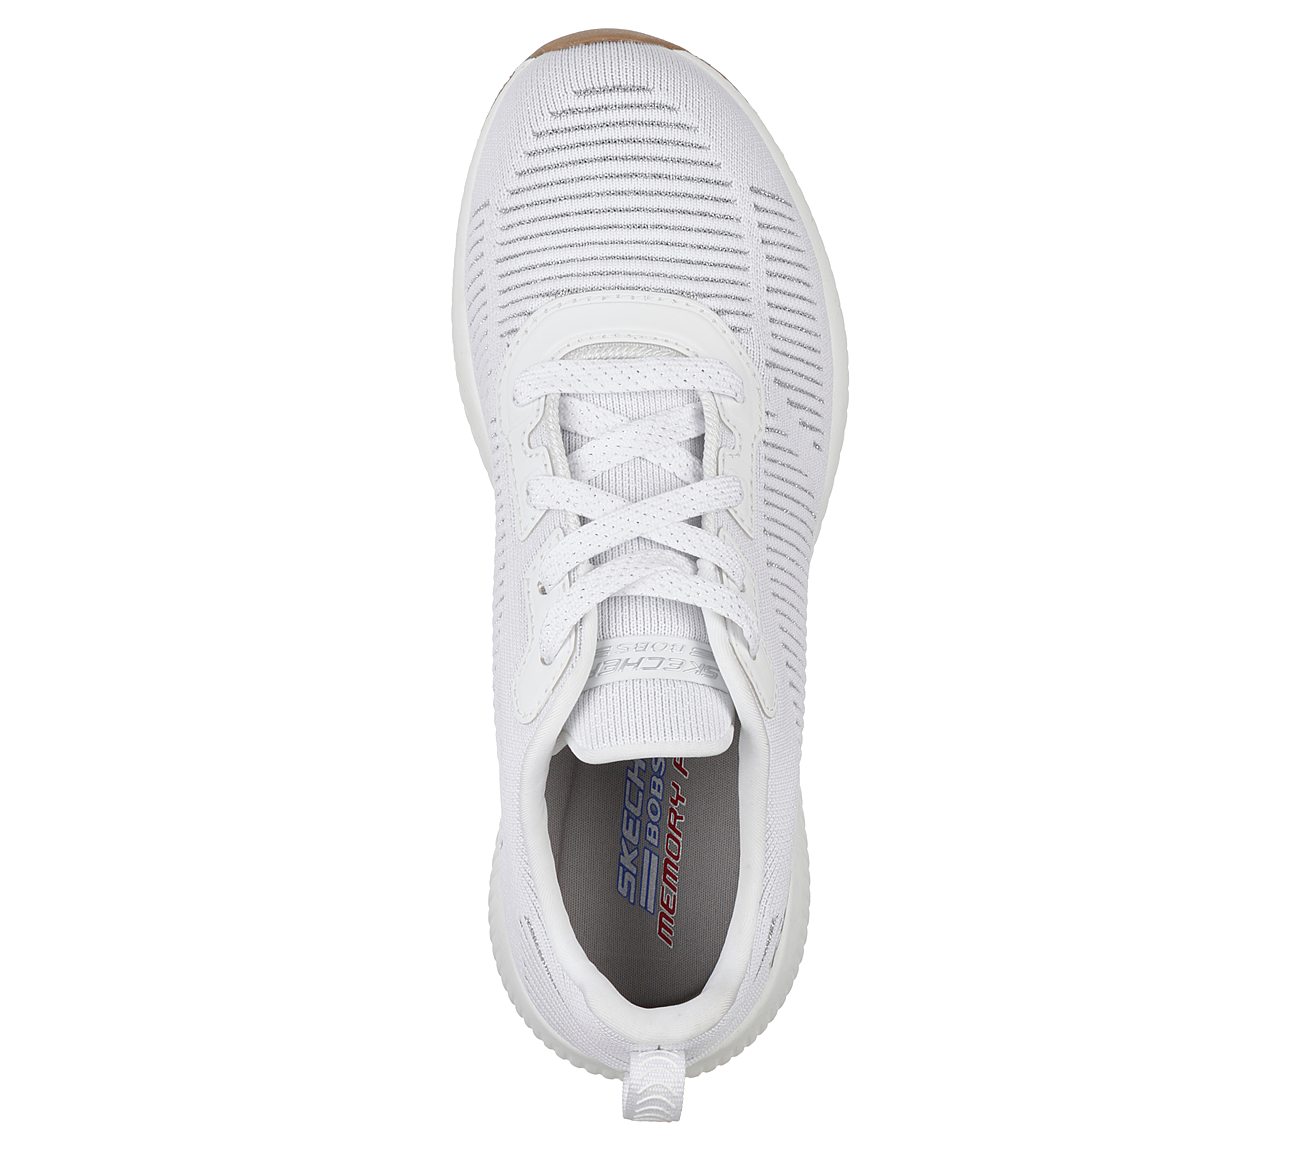 skechers bobs lace up